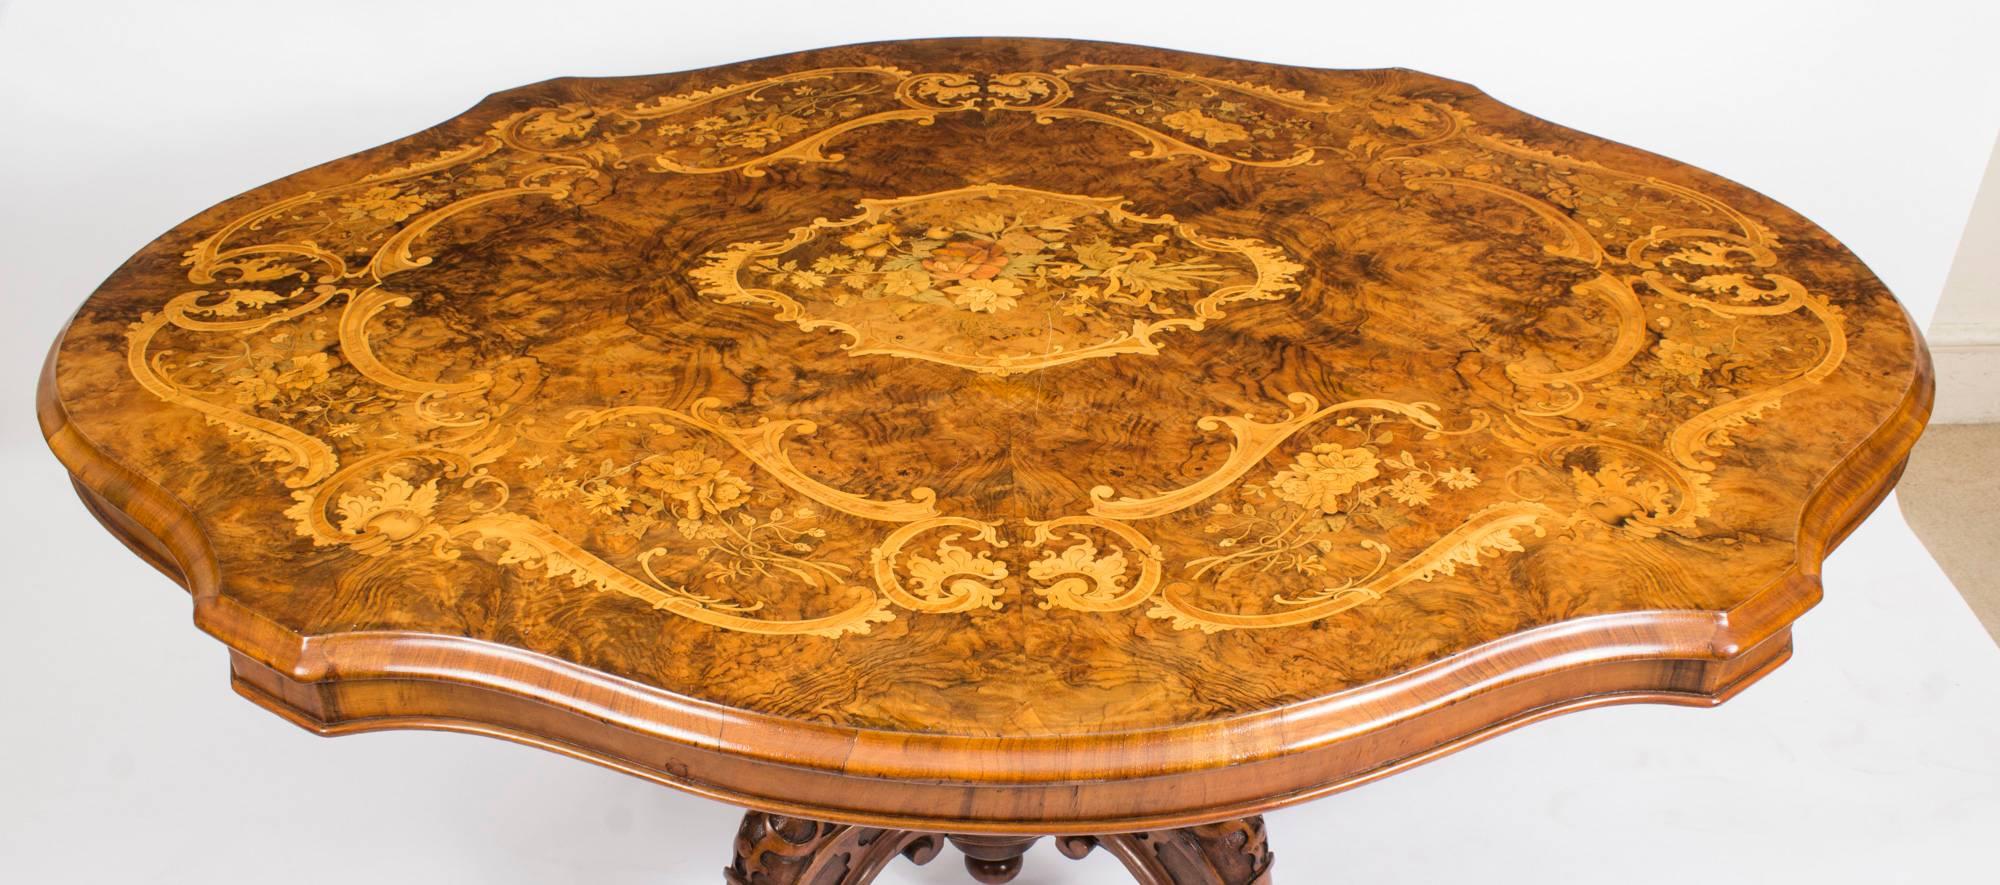 This is a superb antique Victorian burr walnut and marquetry loo table, circa 1860 in date.

The tabletop is shaped oval in form and features wonderful butterflied burr walnut with superb floral marquetry decoration. The base has been skillfully